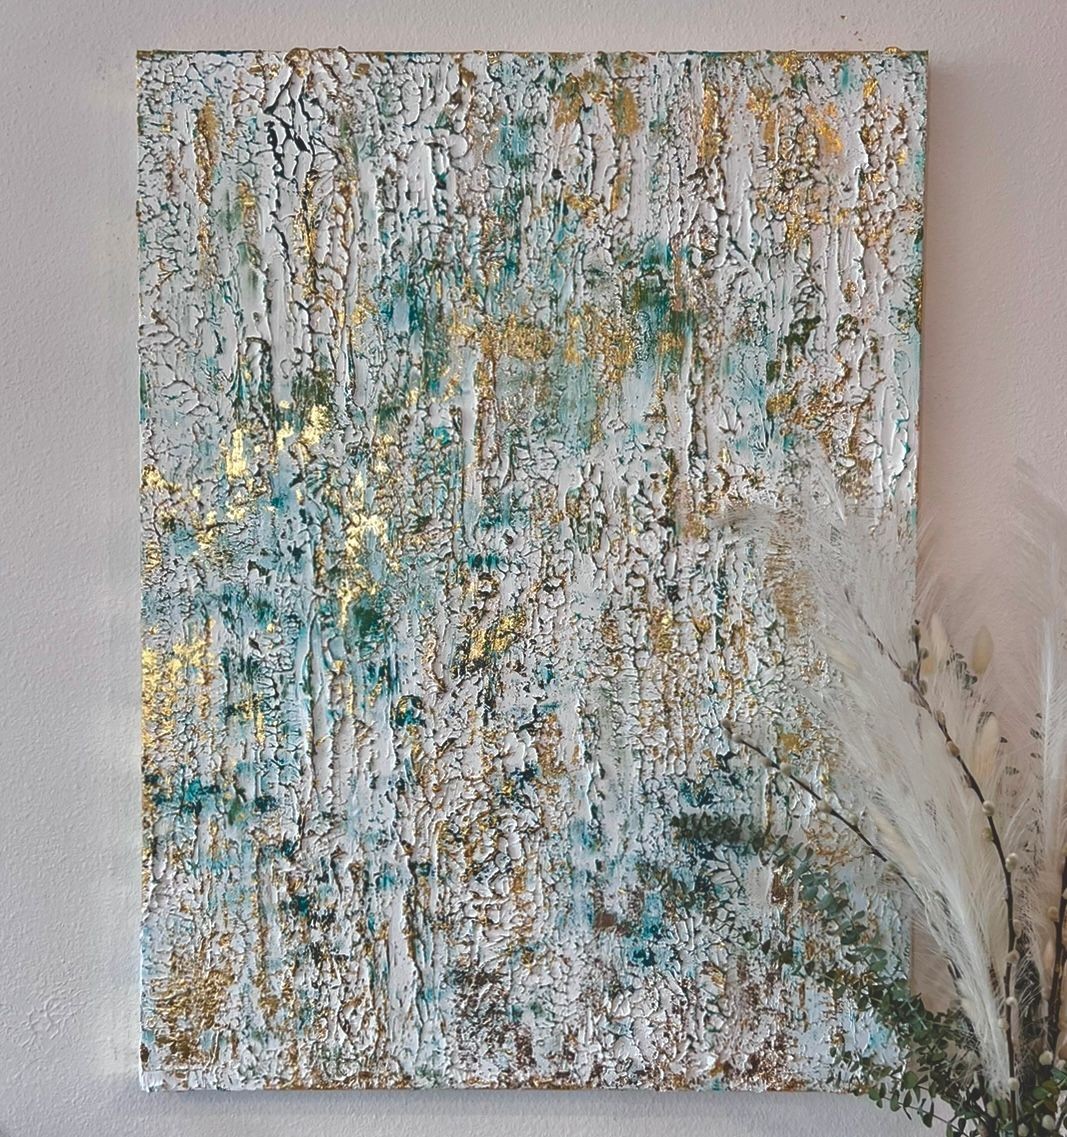  Gold Leaf Textured Green Acrylic Painting